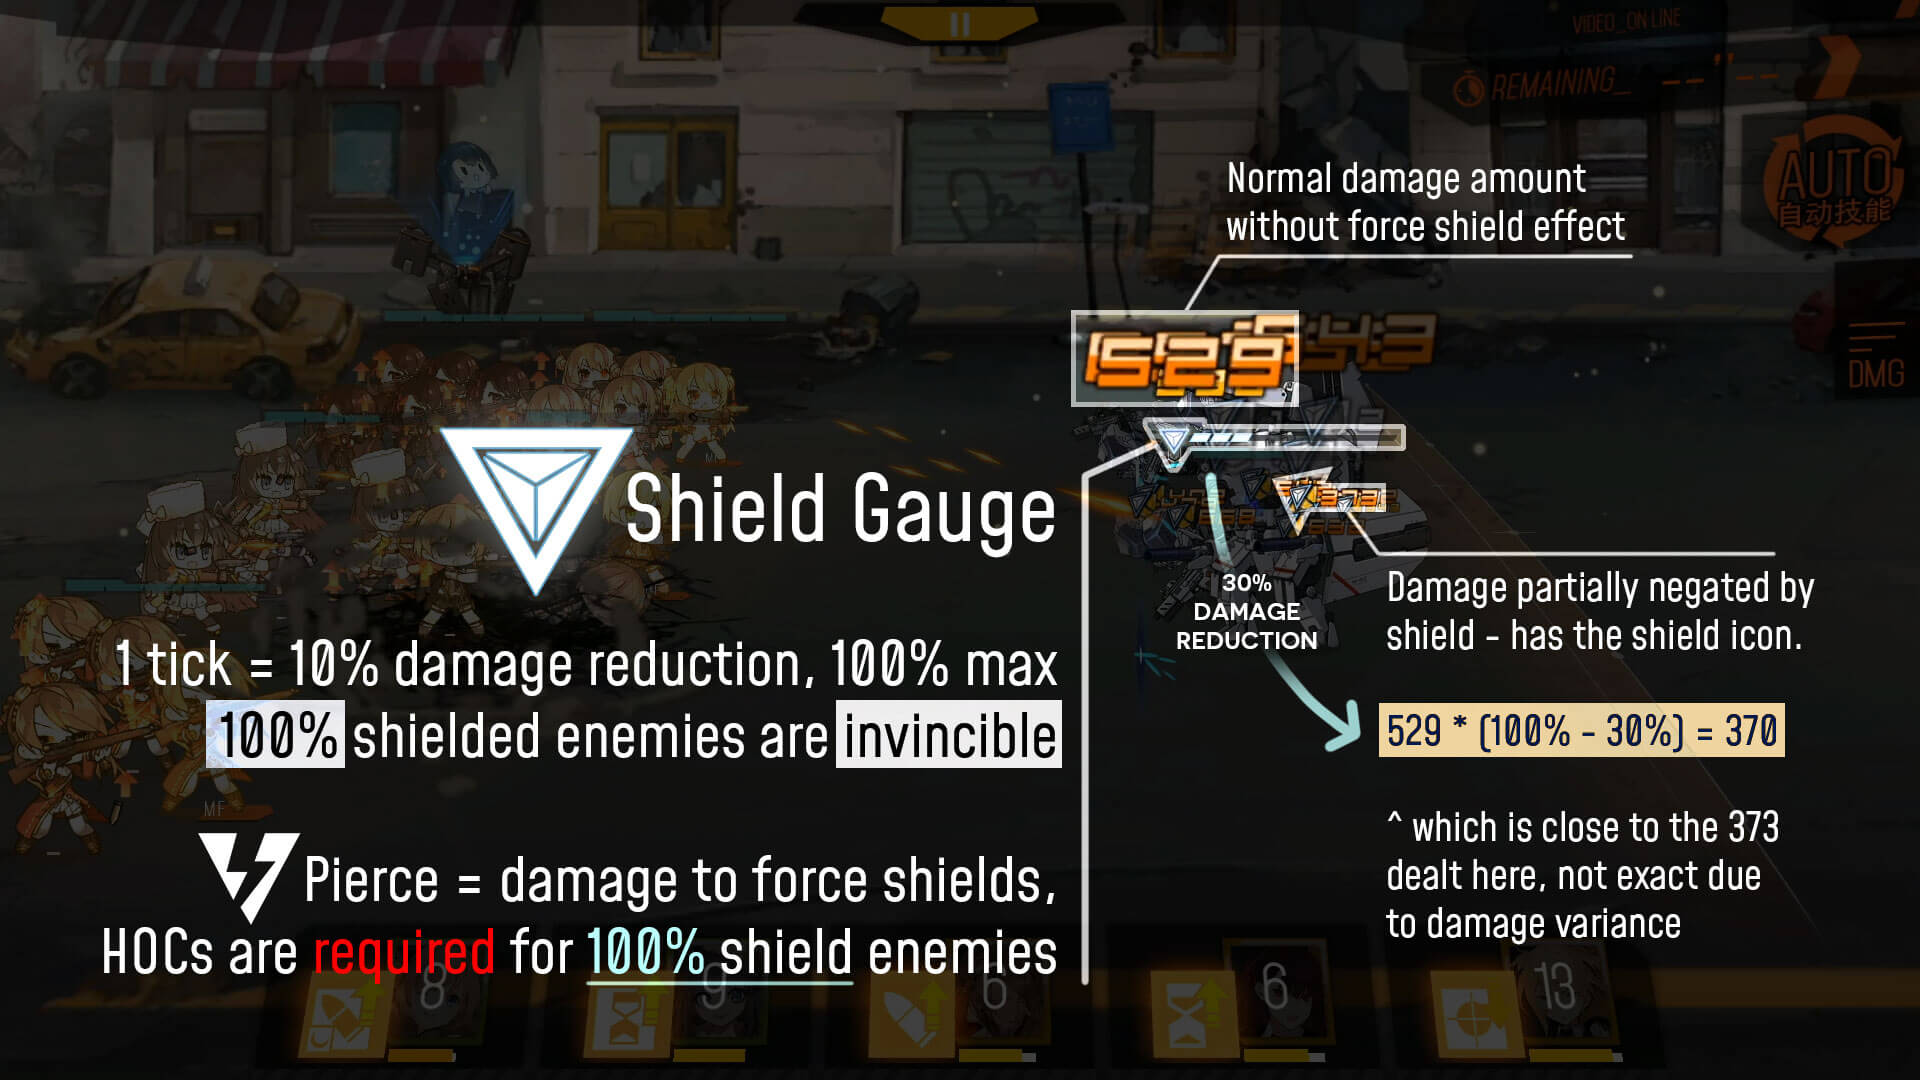 Infographic showing how enemy Force Shields work in GFL